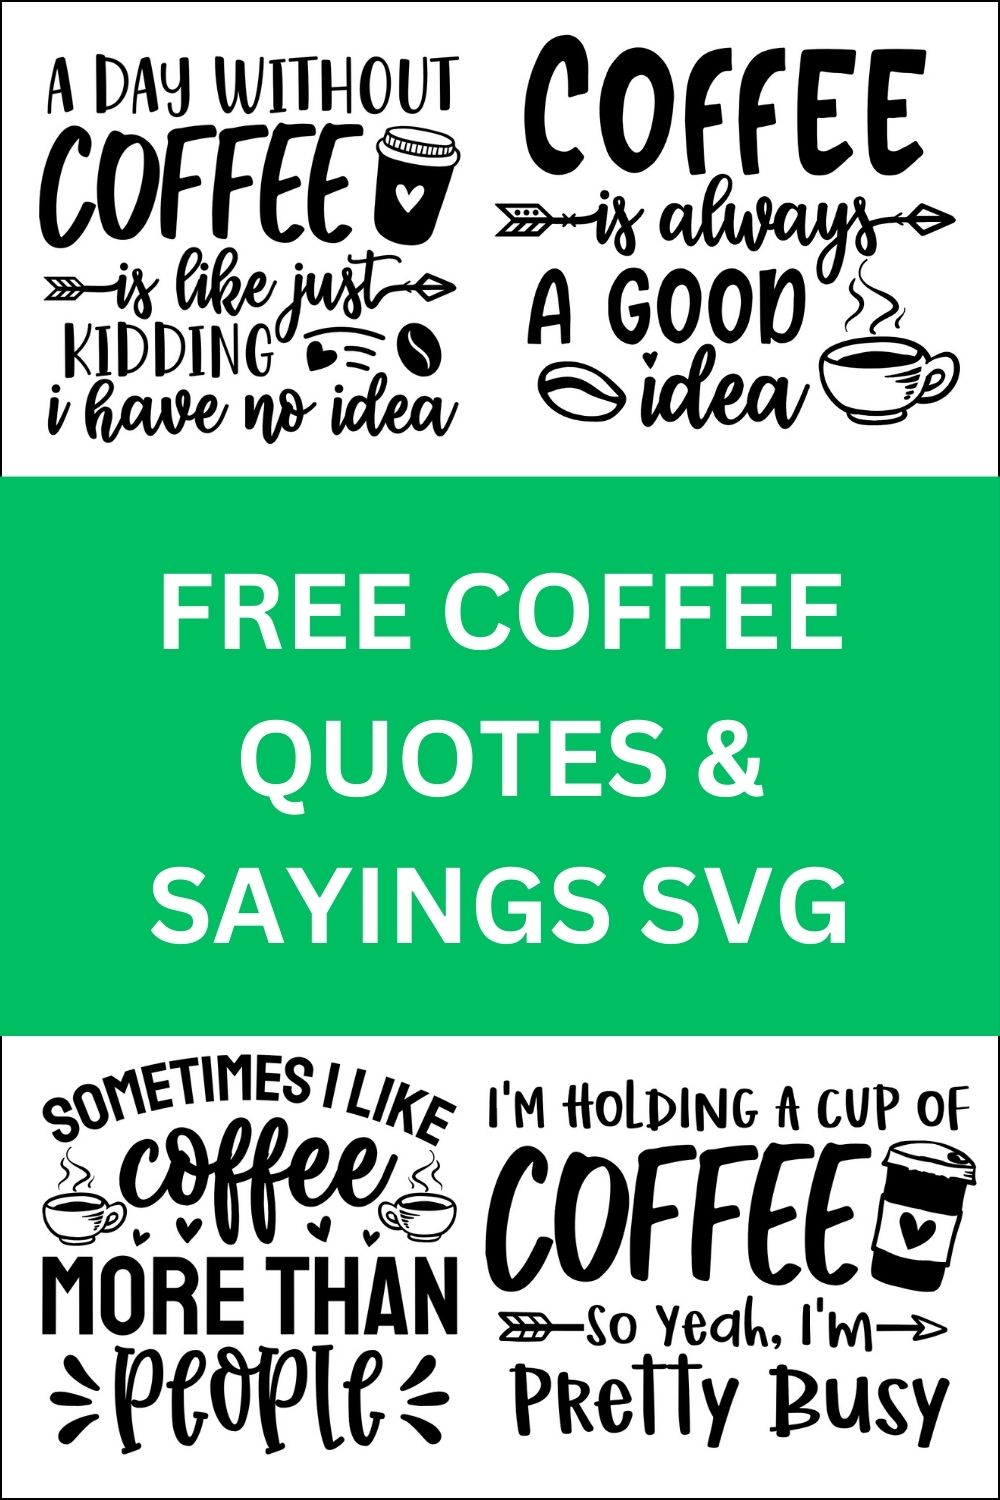 free coffee sayings and quotes for cricut and silhouette. Download cut files